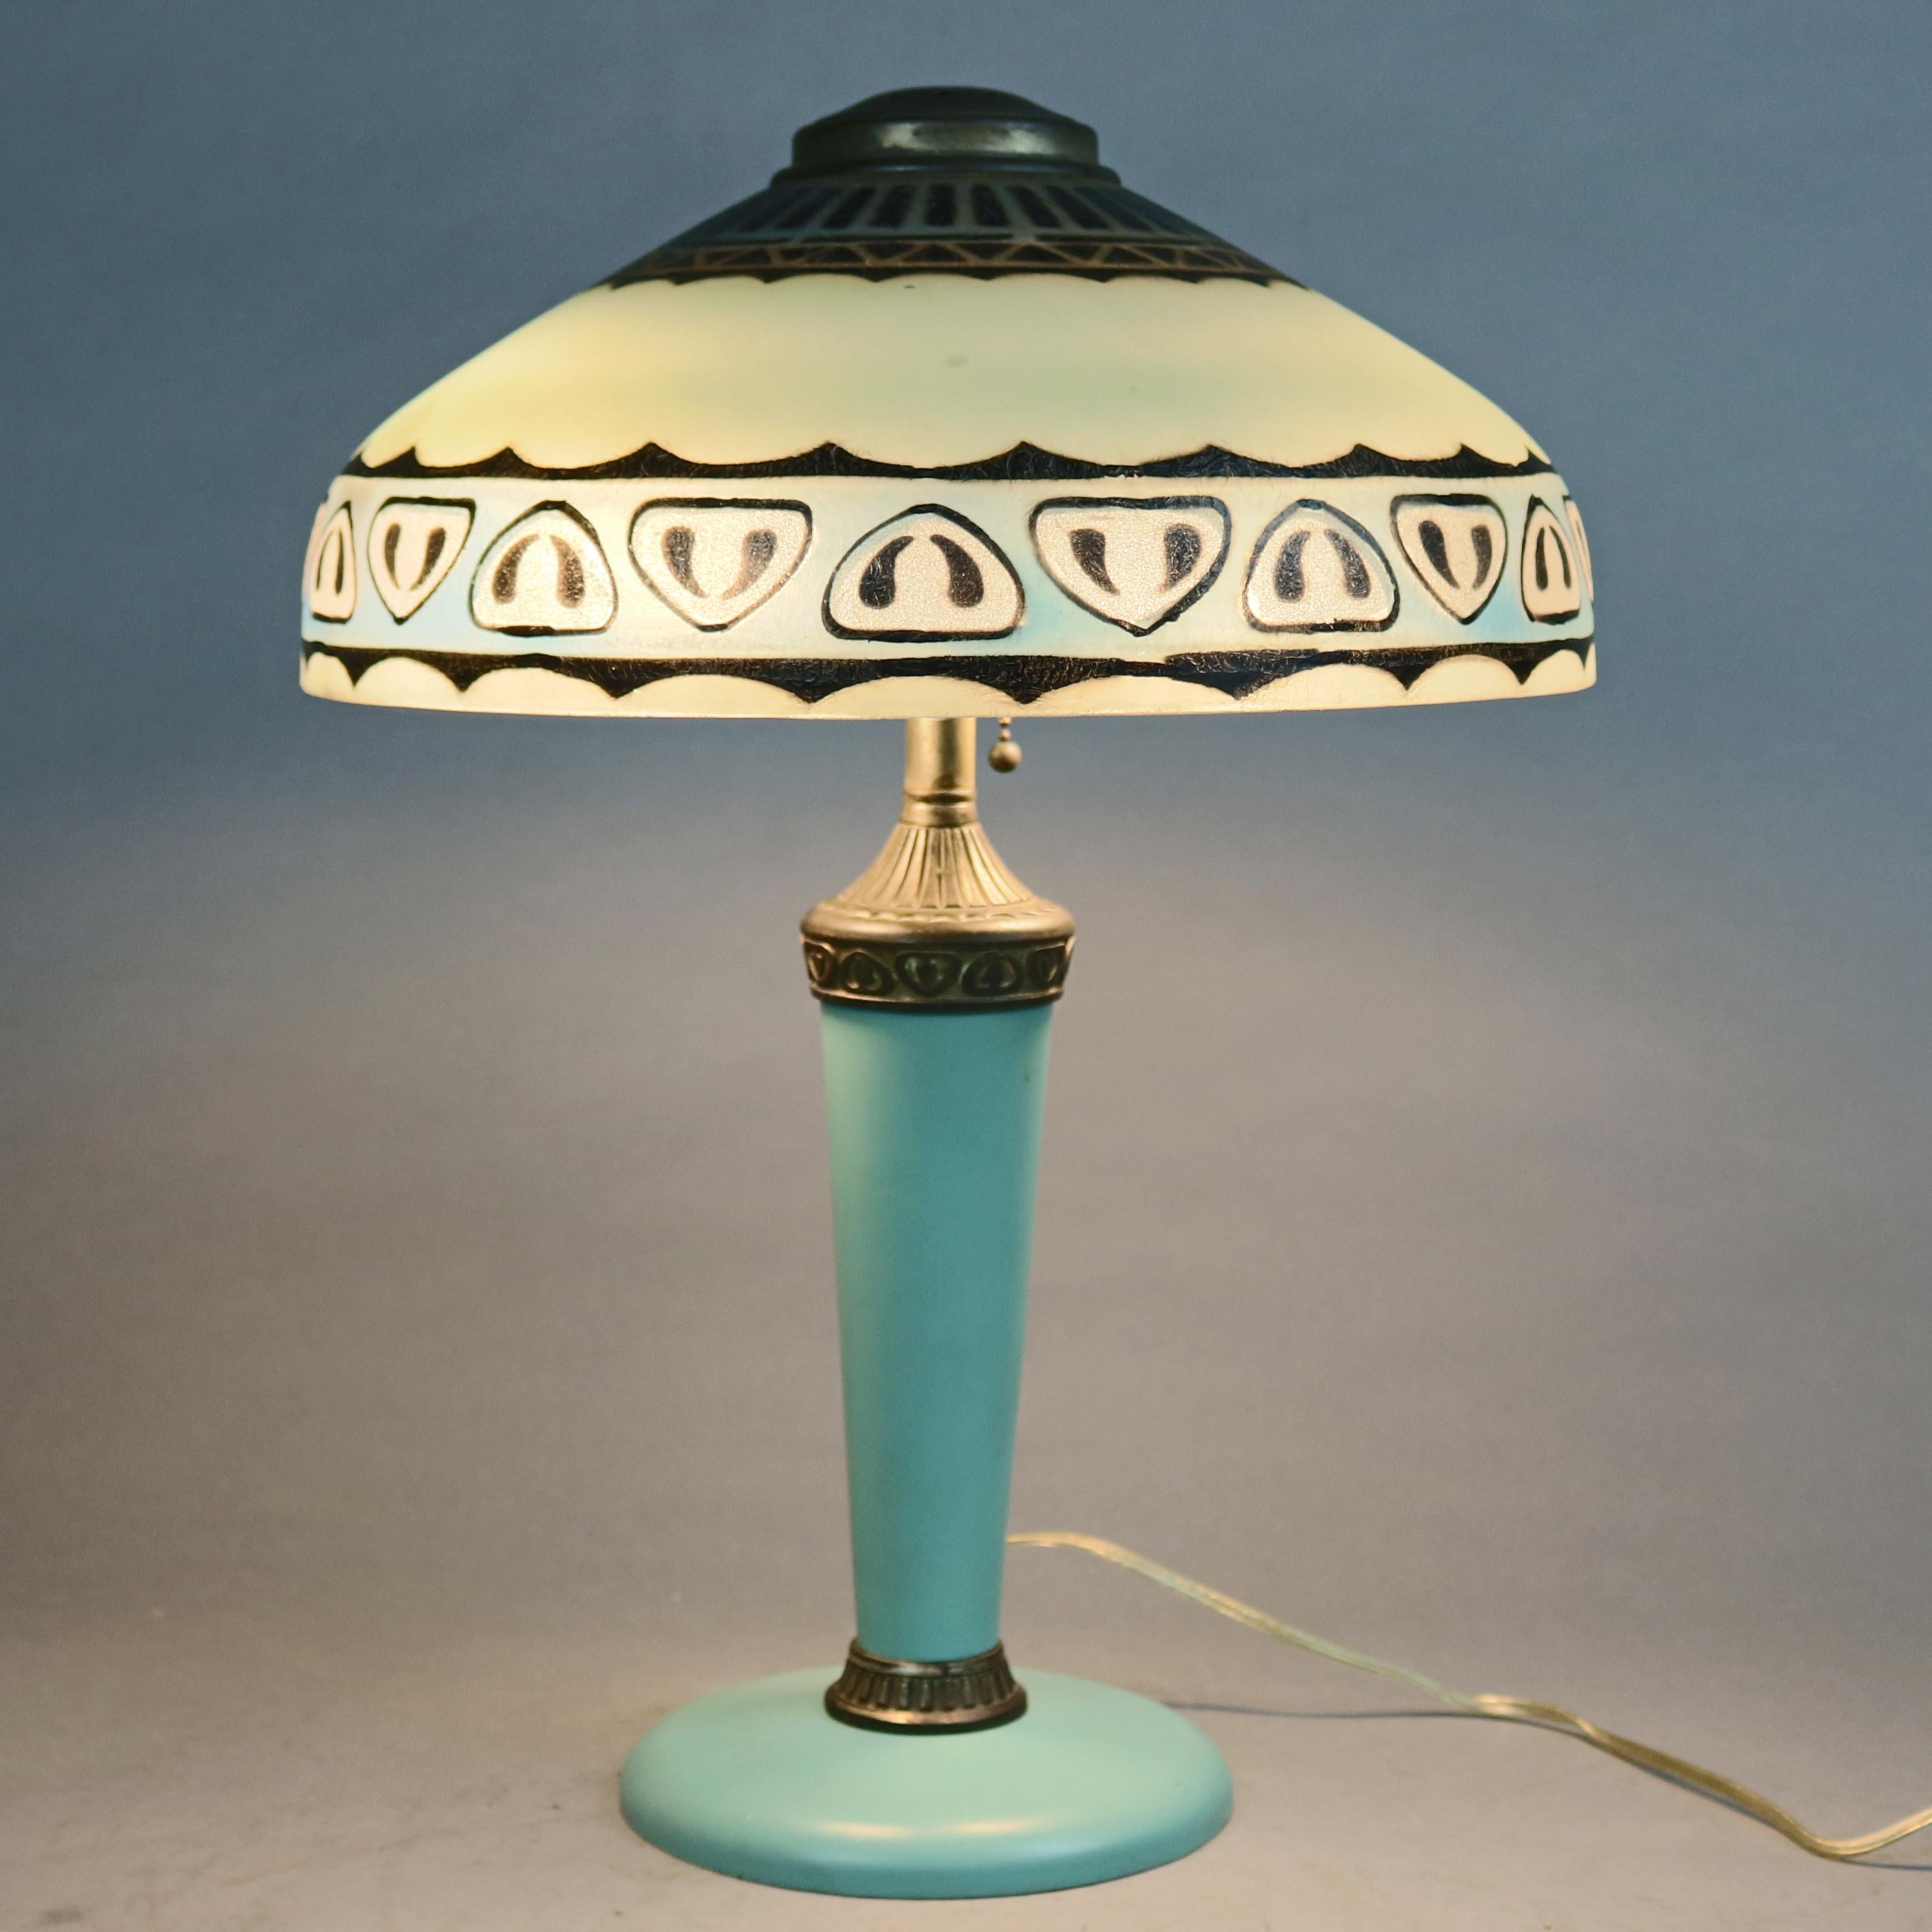 American Antique Arts & Crafts Pittsburgh Reverse Painted Lamp, circa 1920